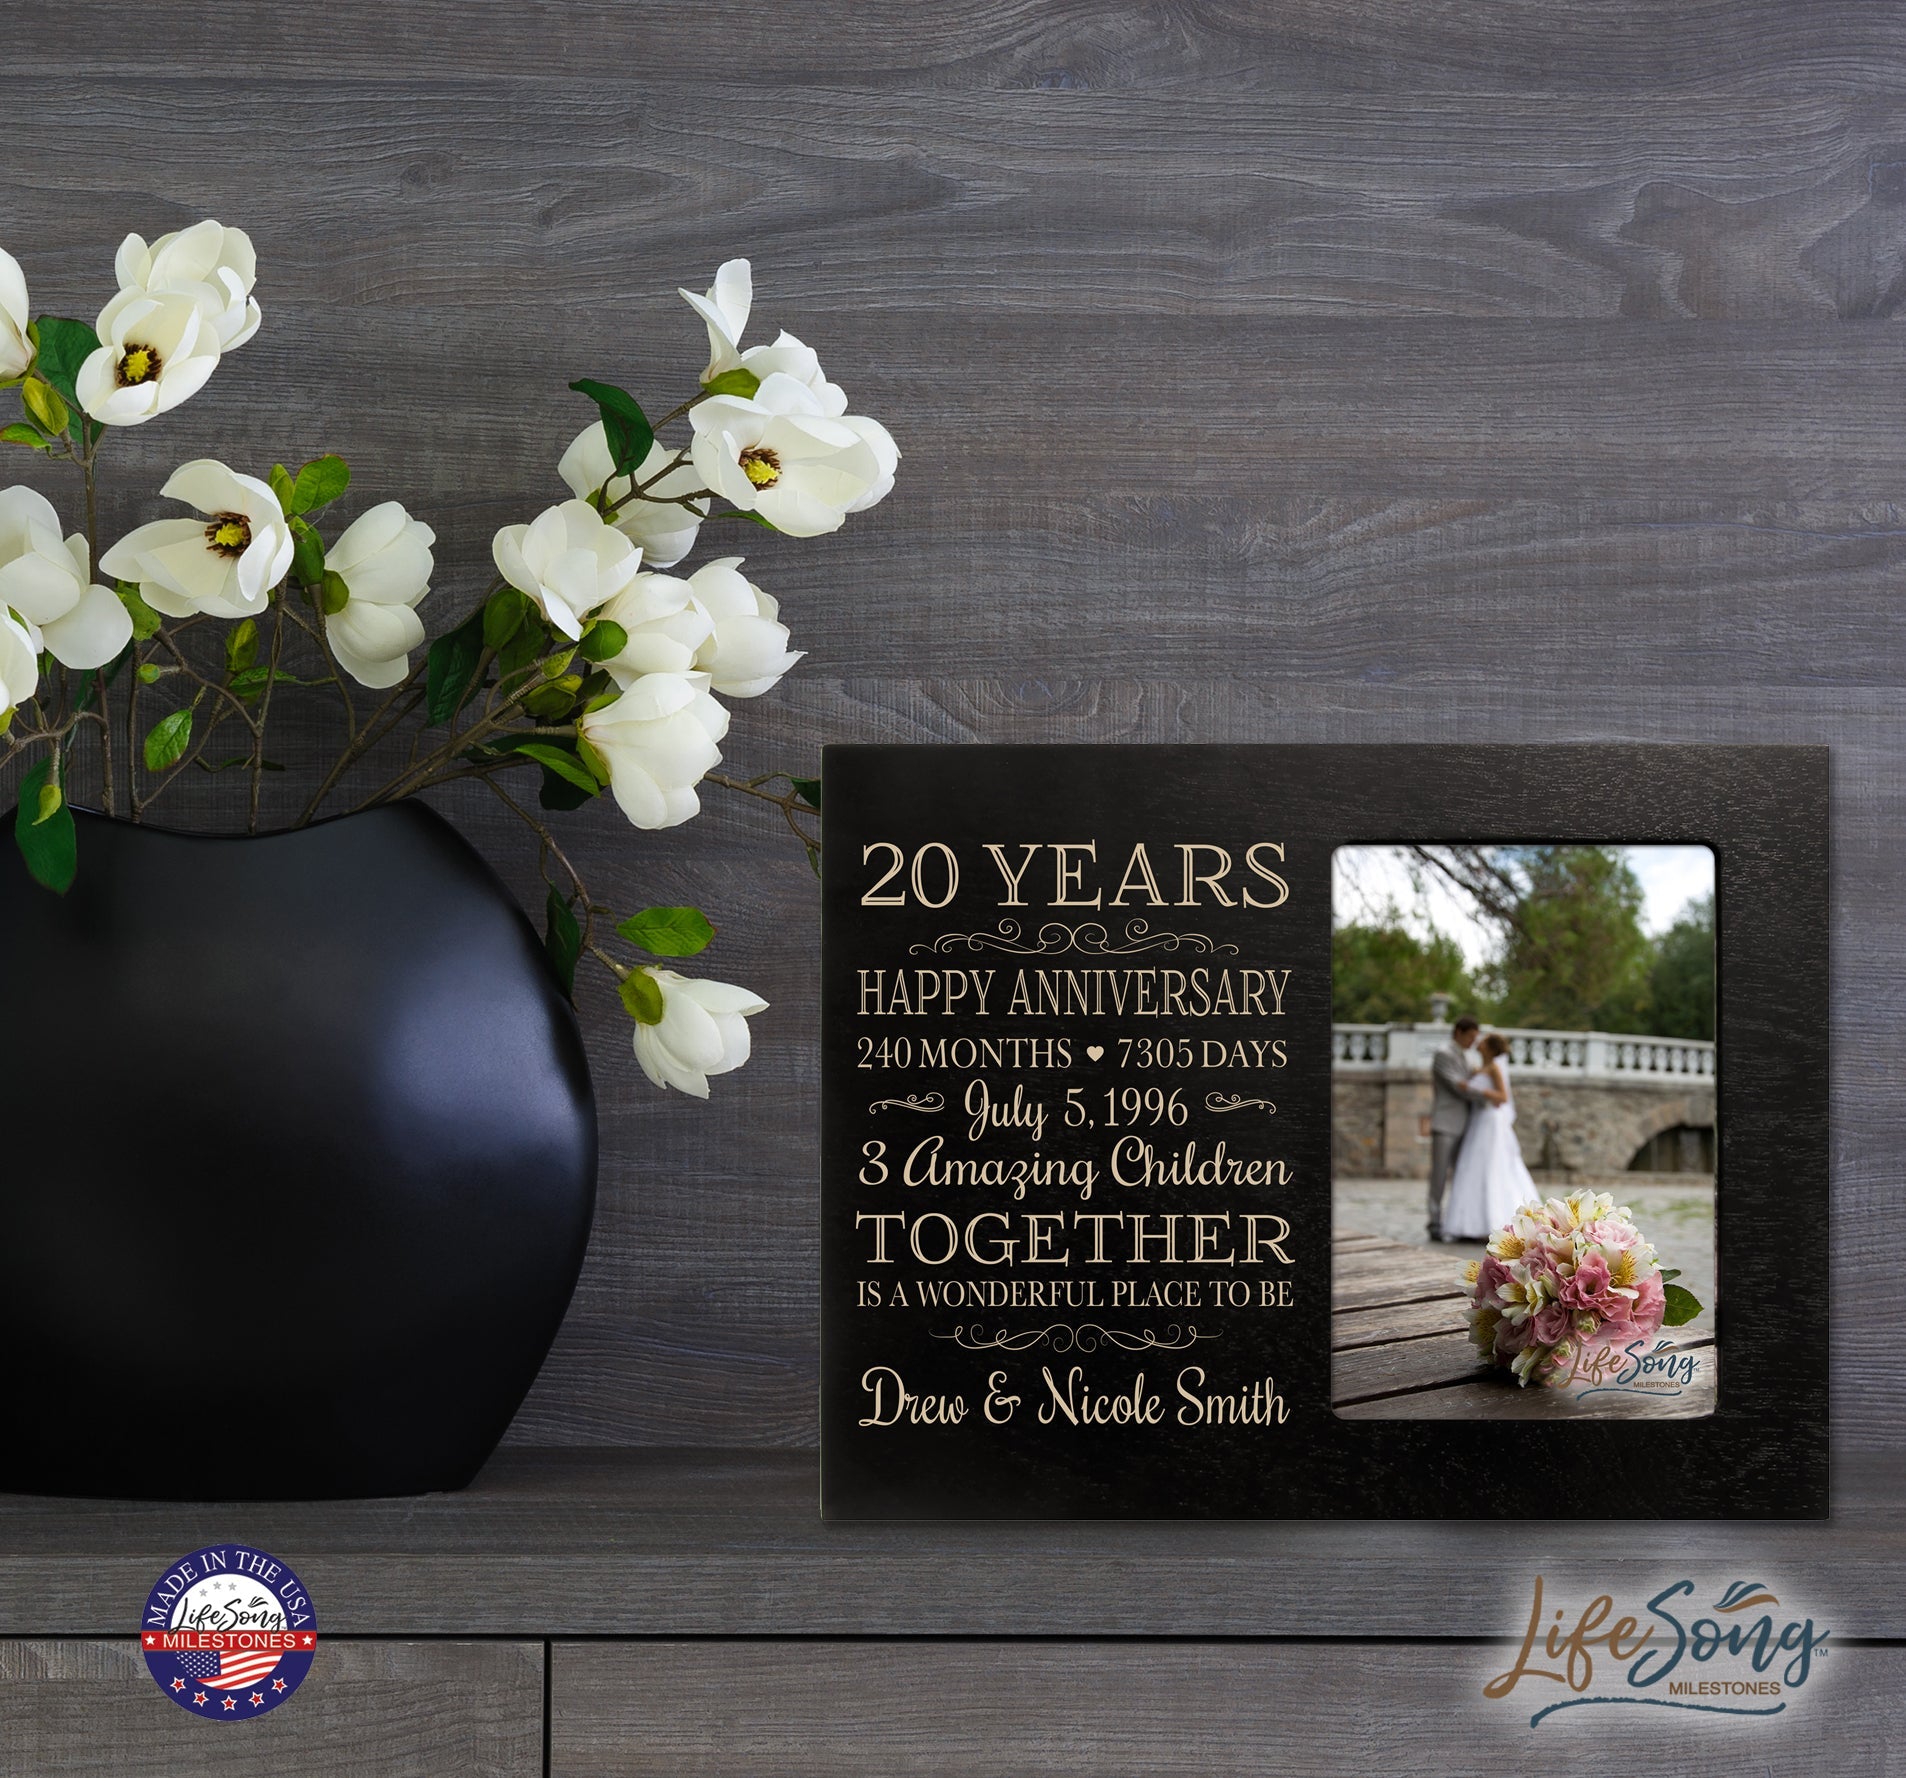 Personalized Anniversary Photo Frame - 20th Counting Our Blessings - LifeSong Milestones